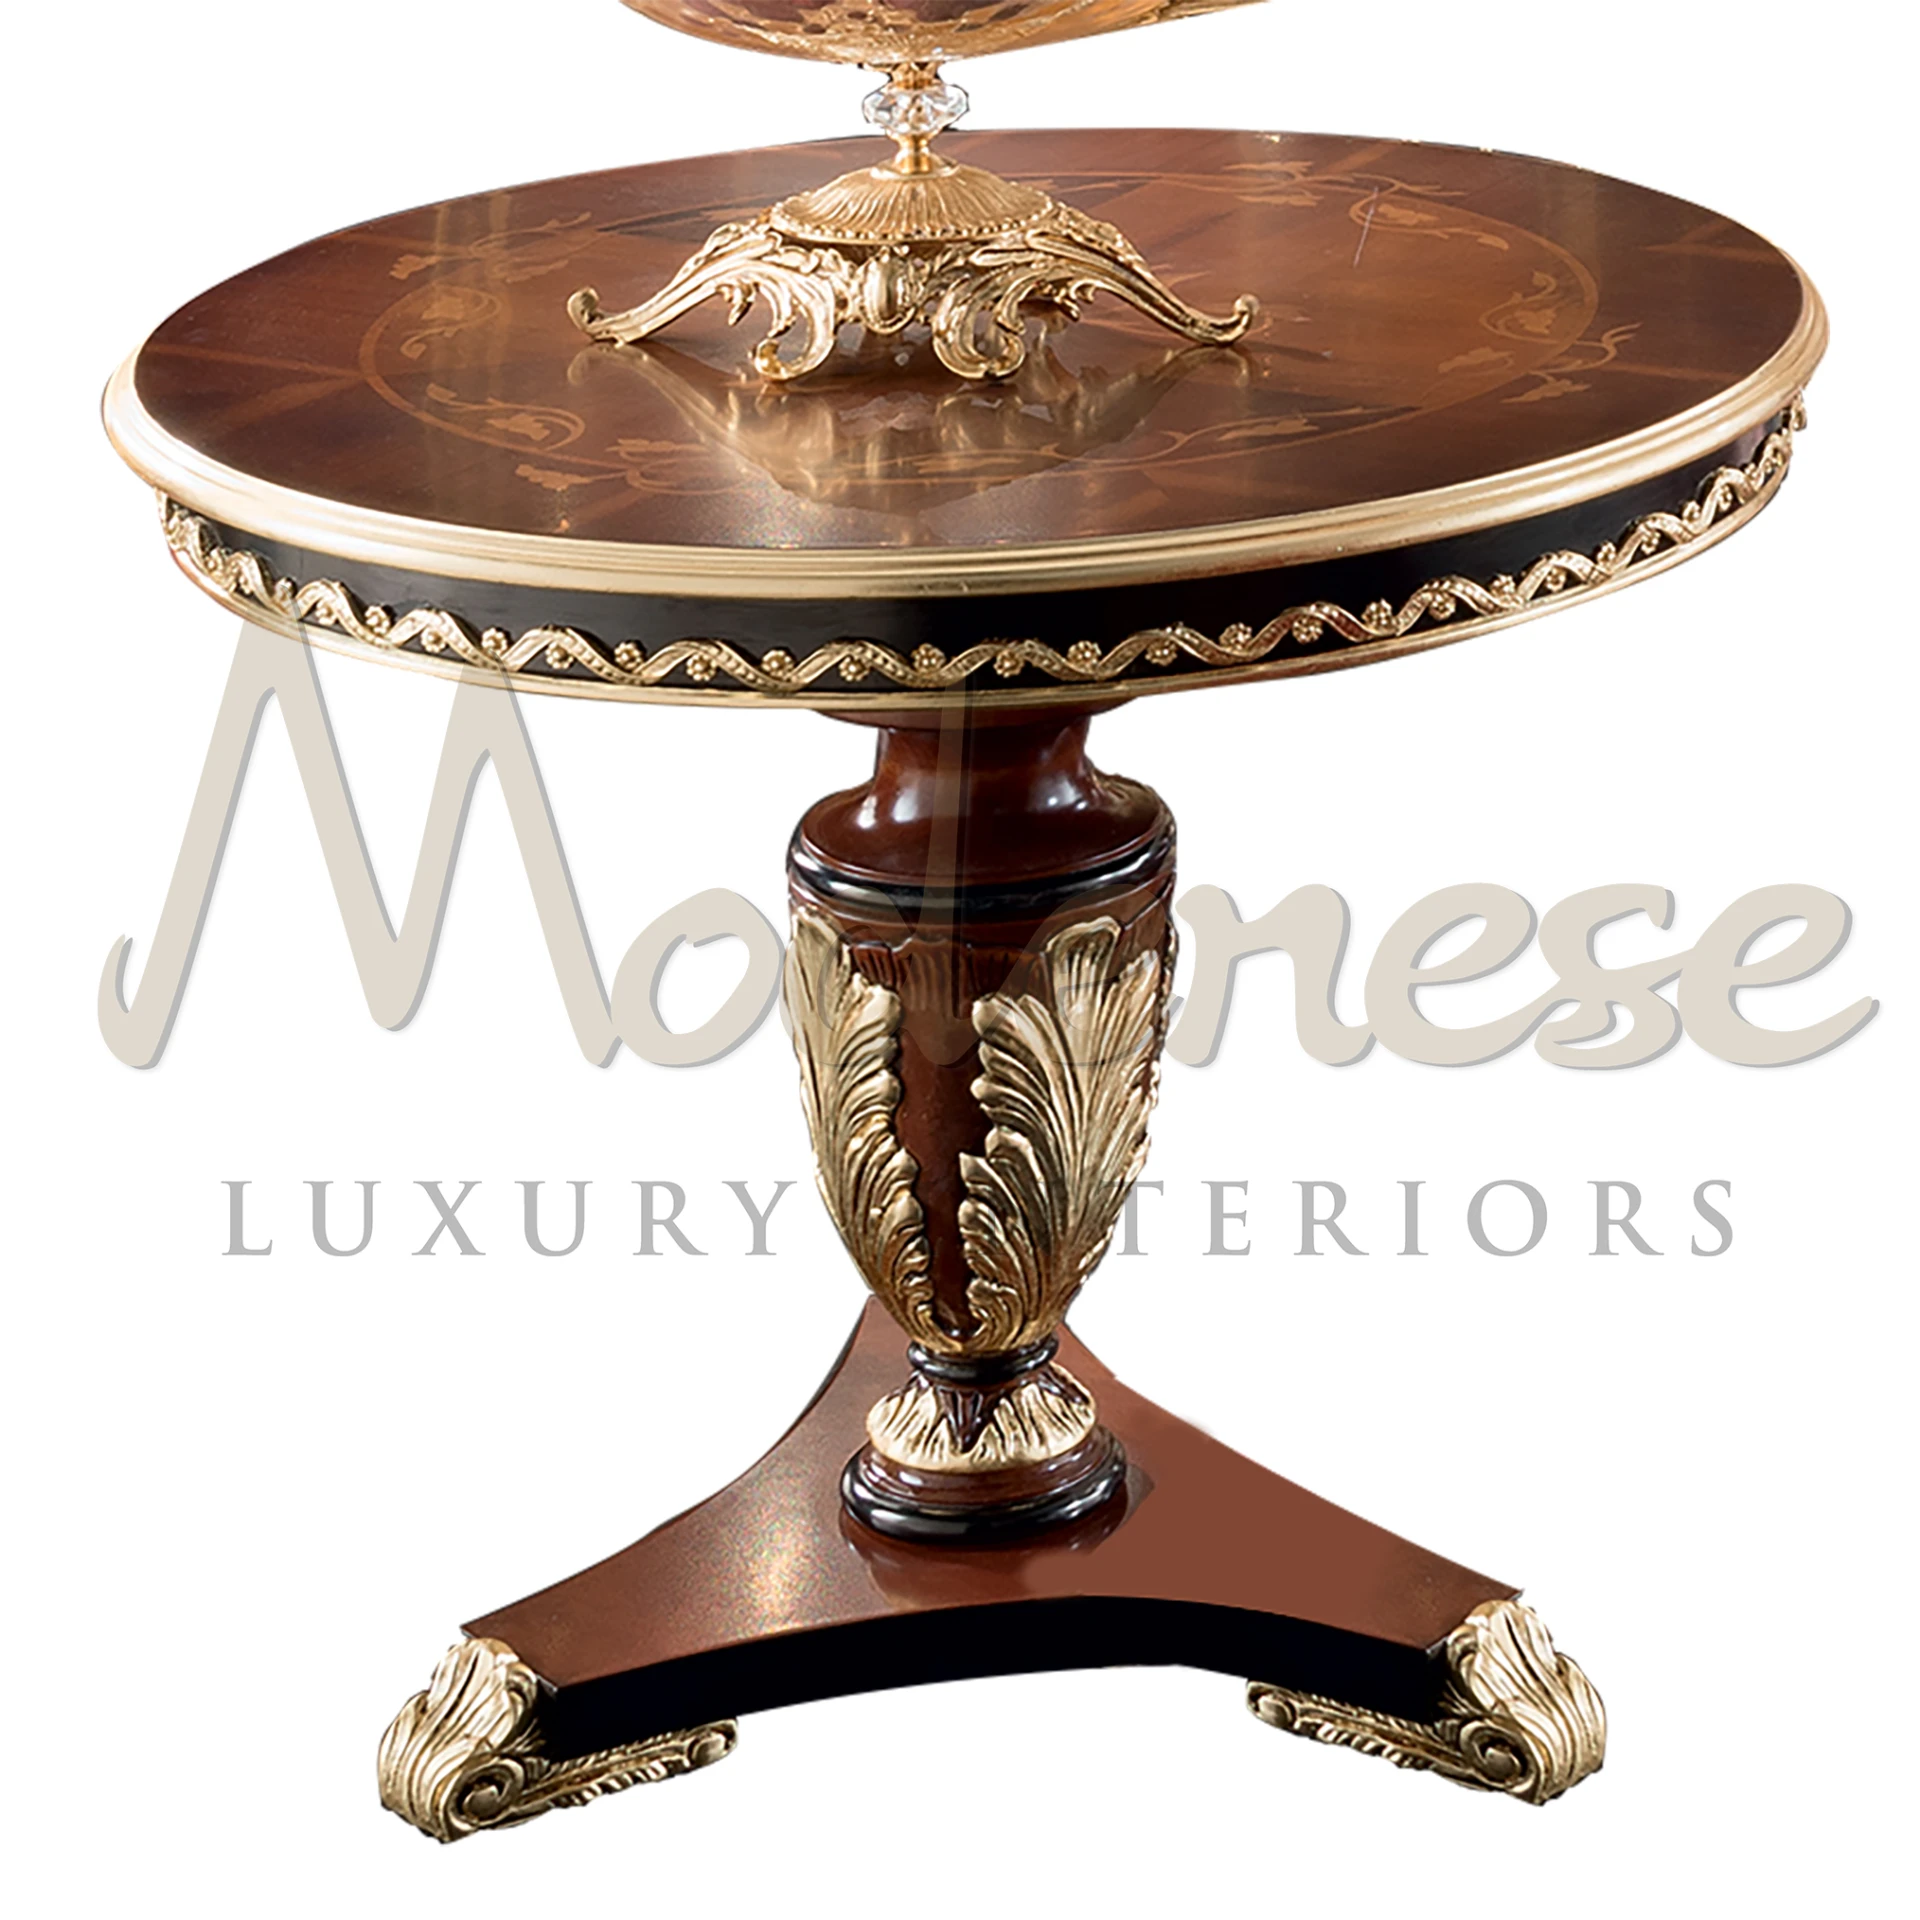  Elegant Traditional Solid Wood Central Table by Italian artisans, featuring classic walnut finishing and gold leaf details for timeless style